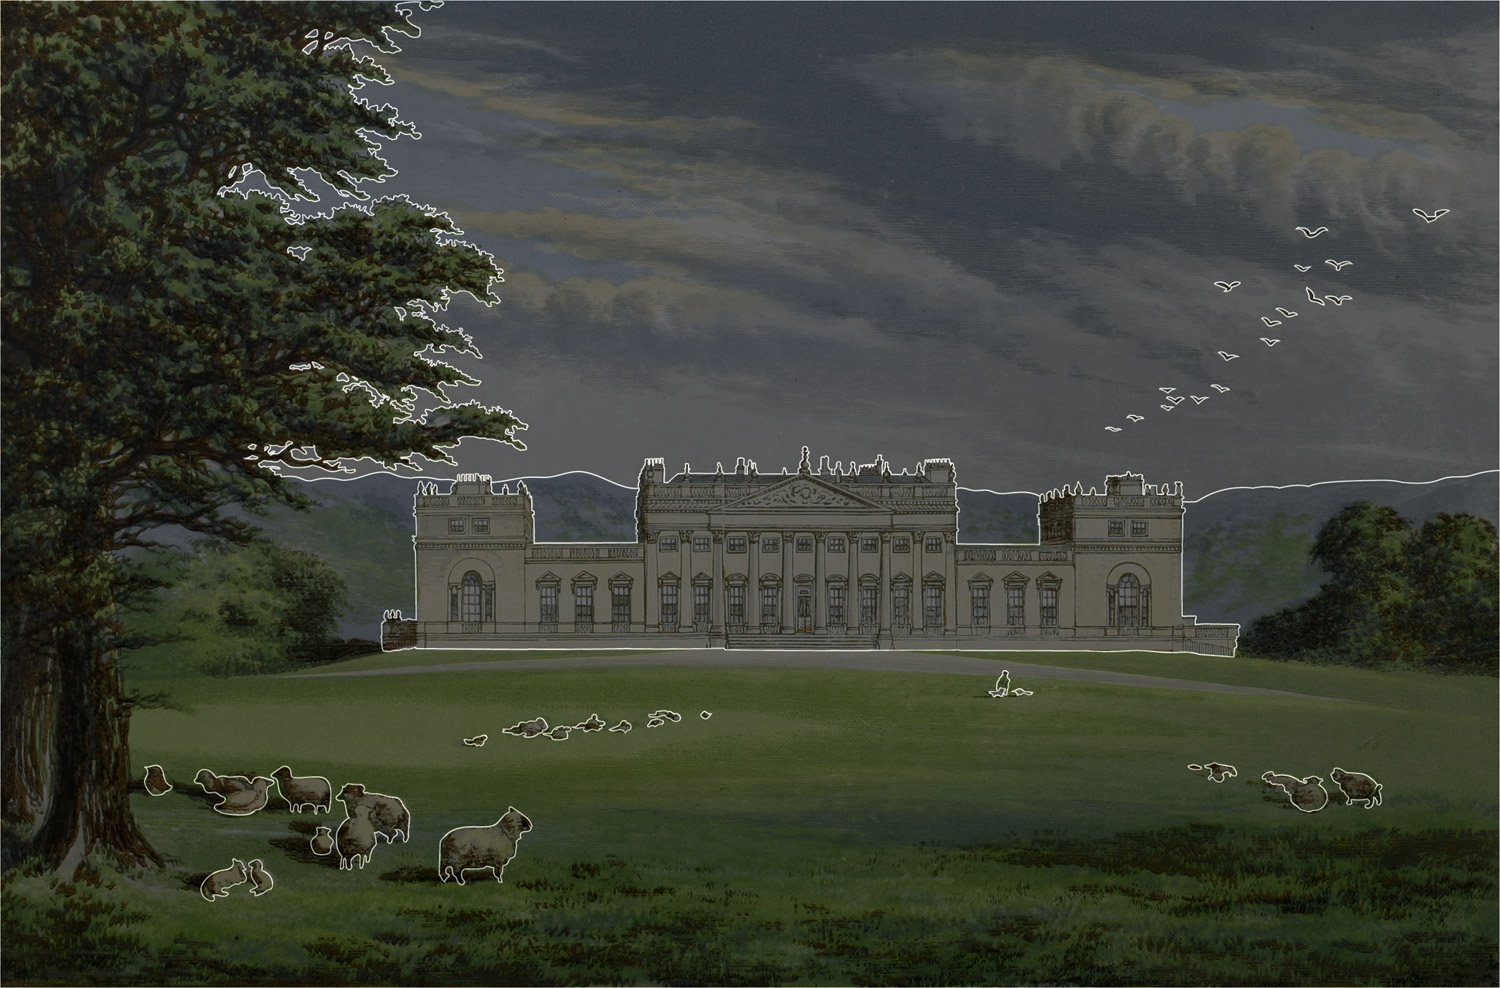 Outlined areas of Harewood House illustration